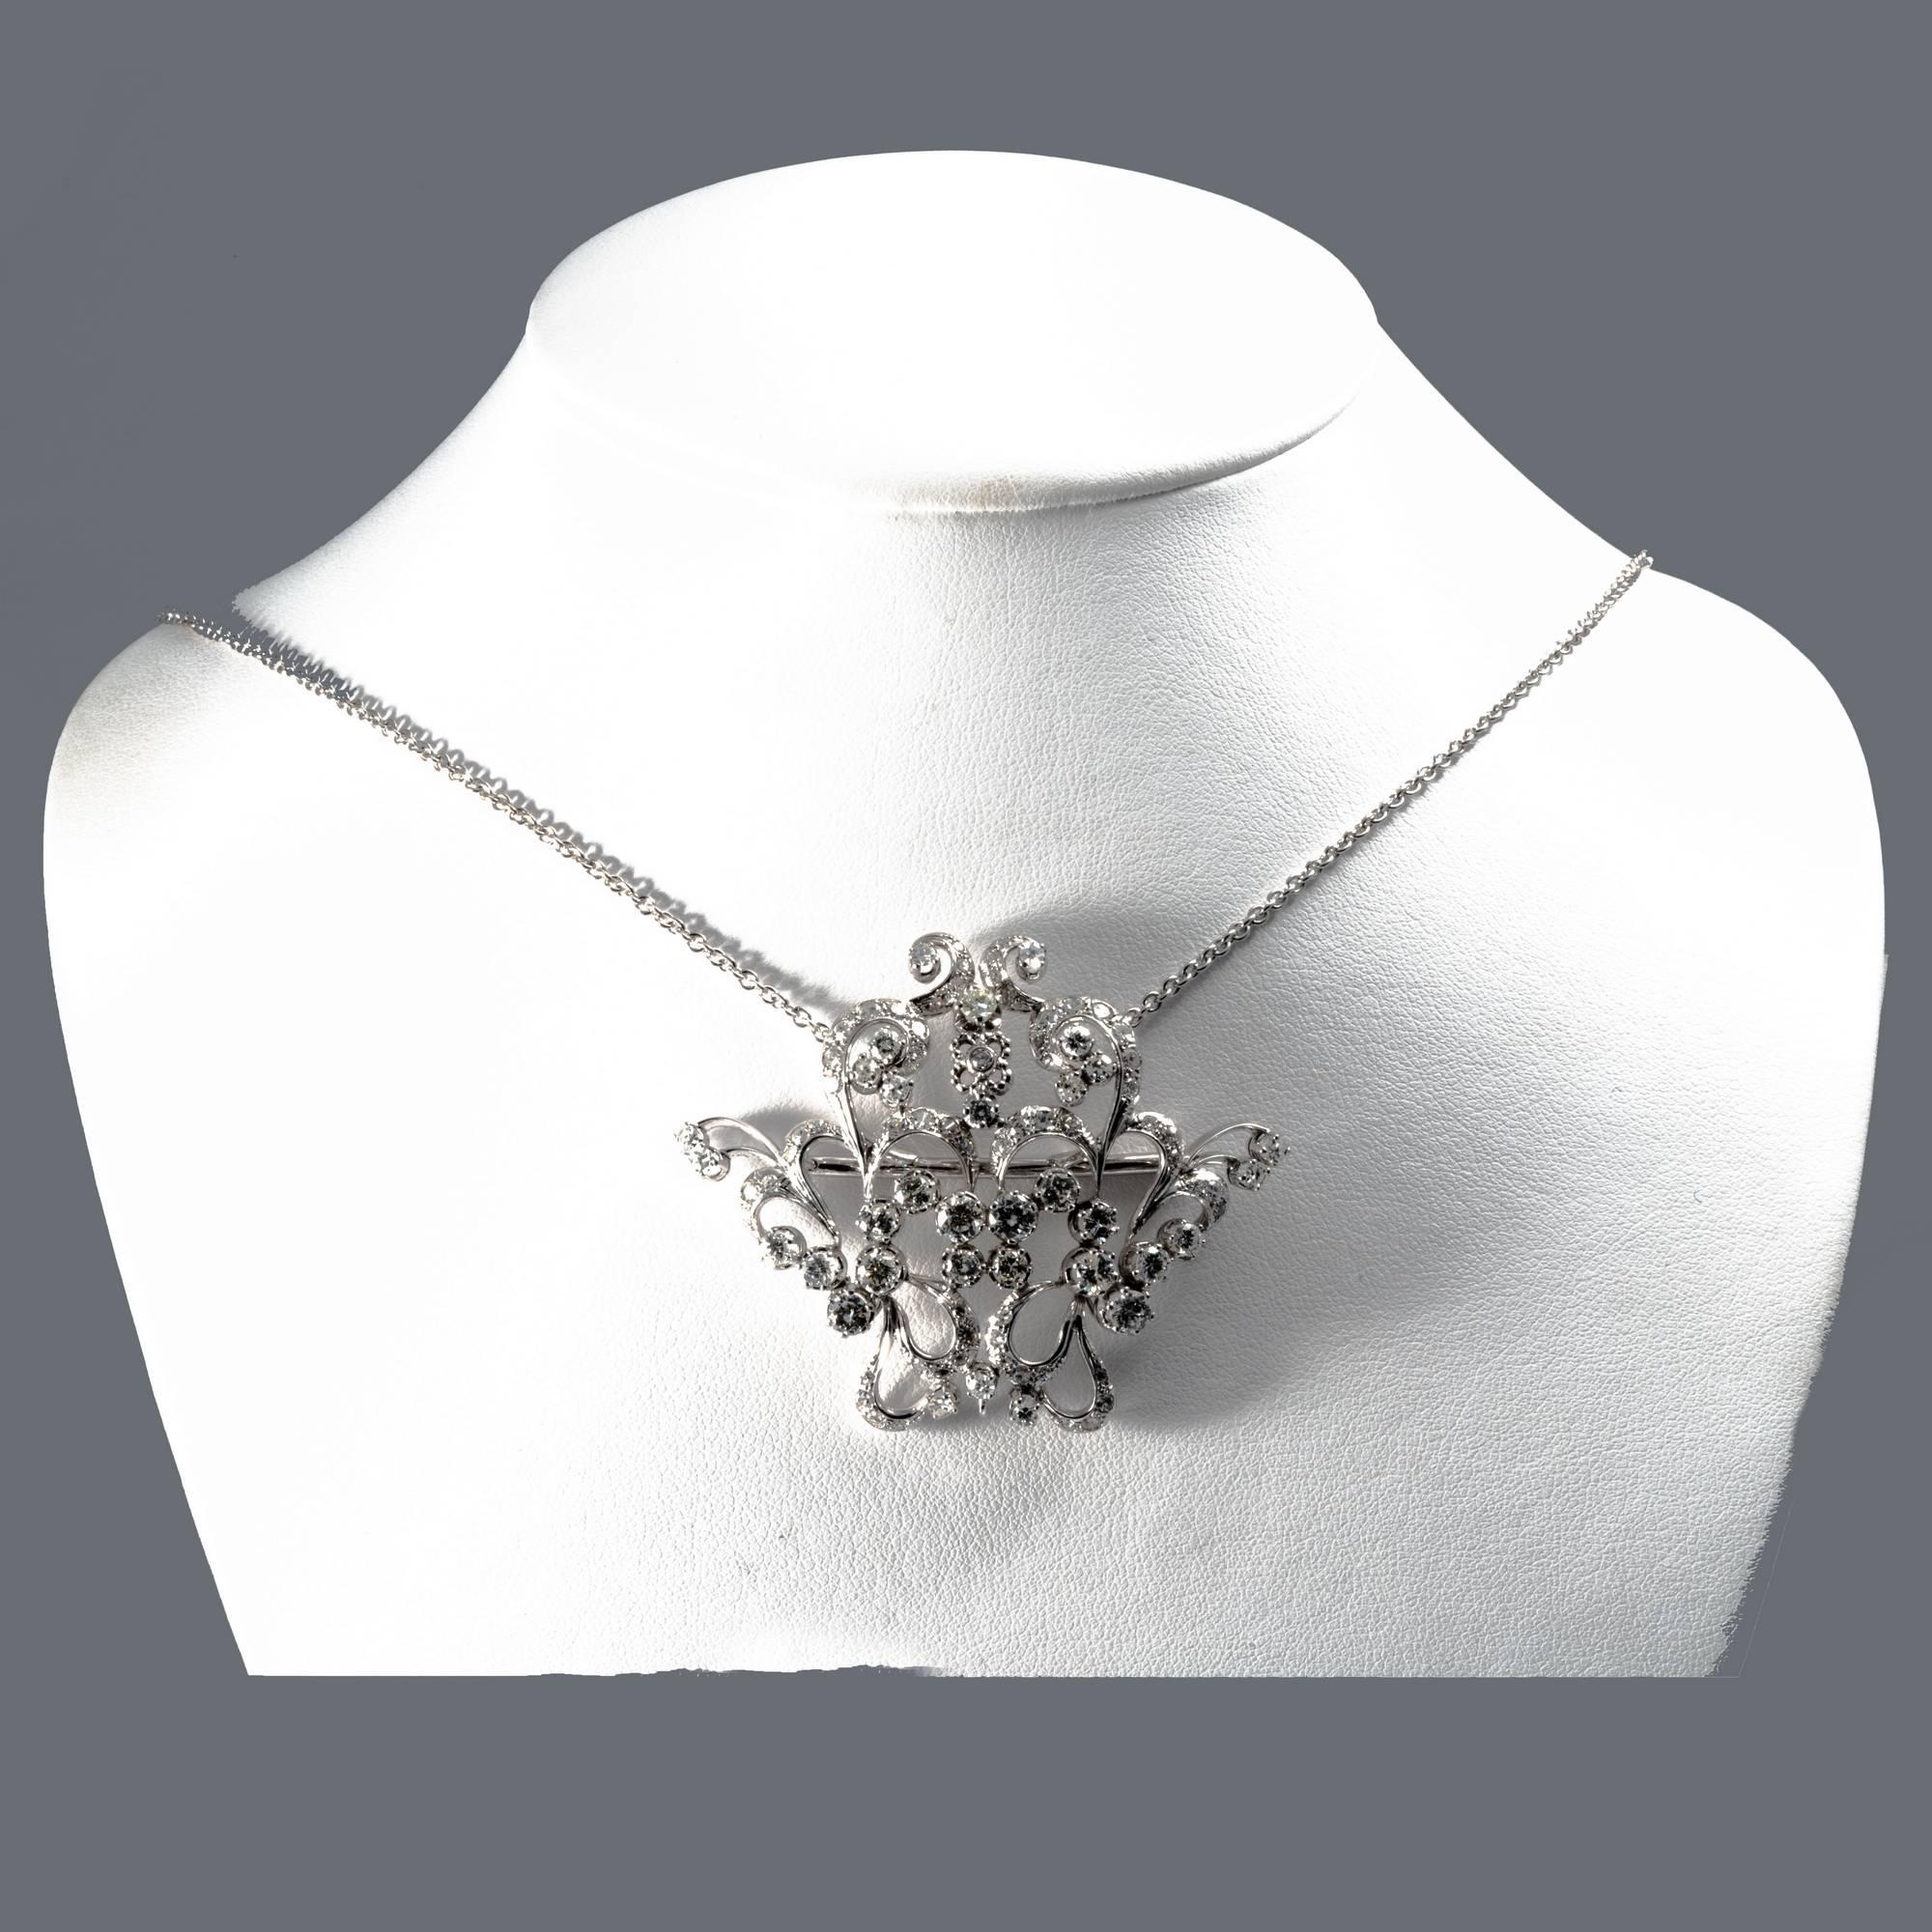 18K Midcentury Vintage Garland Intricated Open Work Diamond Necklace and Brooch For Sale 5